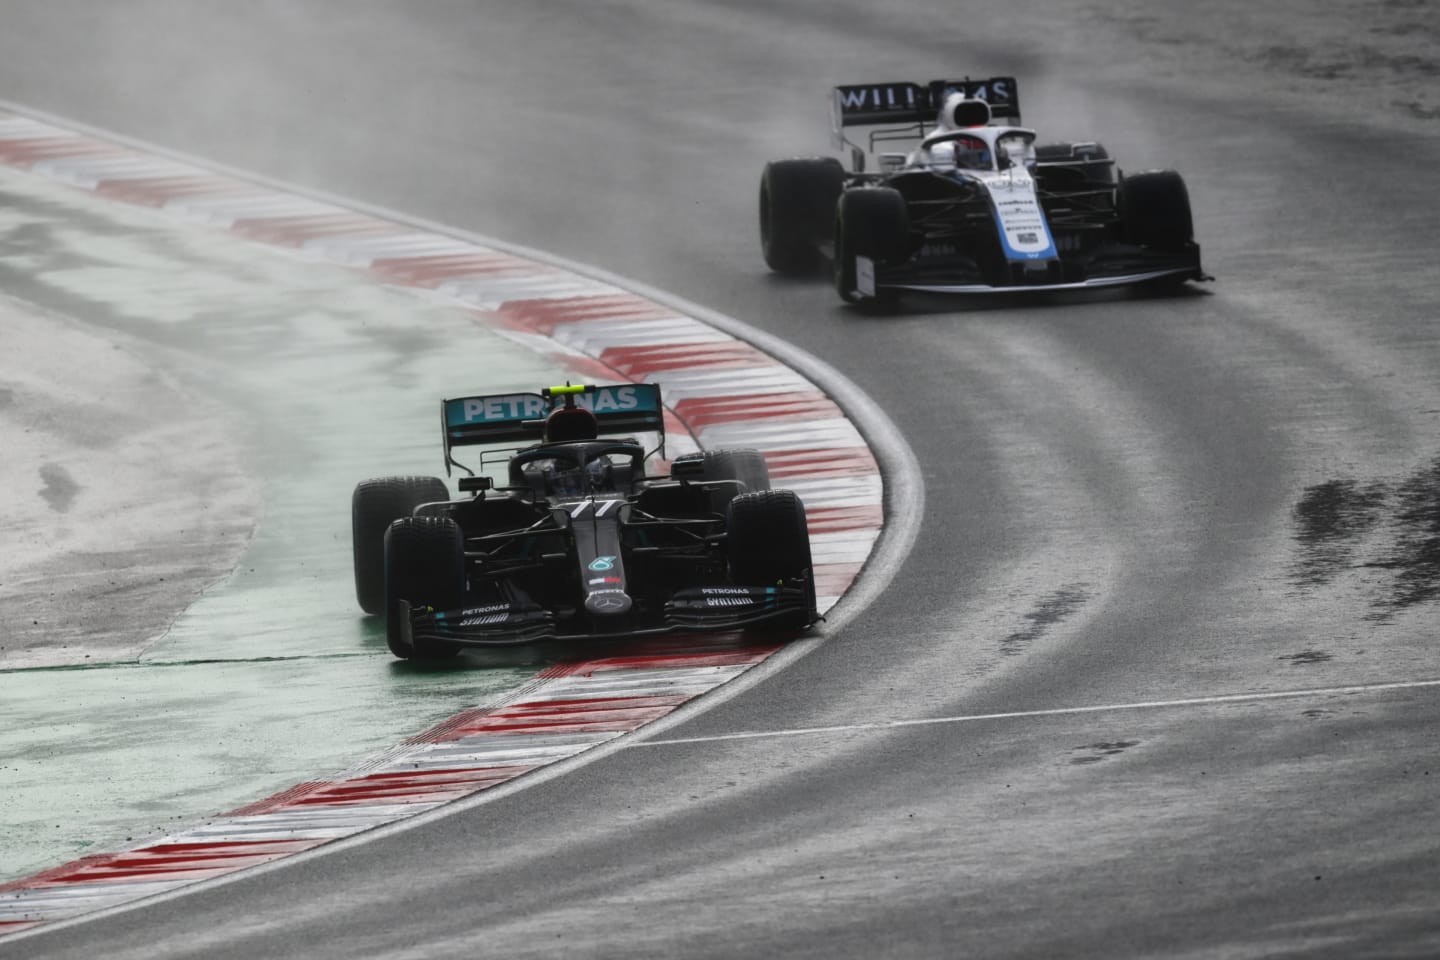 ISTANBUL, TURKEY - NOVEMBER 15: Valtteri Bottas of Finland driving the (77) Mercedes AMG Petronas F1 Team Mercedes W11 leads George Russell of Great Britain driving the (63) Williams Racing FW43 Mercedes during the F1 Grand Prix of Turkey at Intercity Istanbul Park on November 15, 2020 in Istanbul, Turkey. (Photo by Clive Mason/Getty Images)